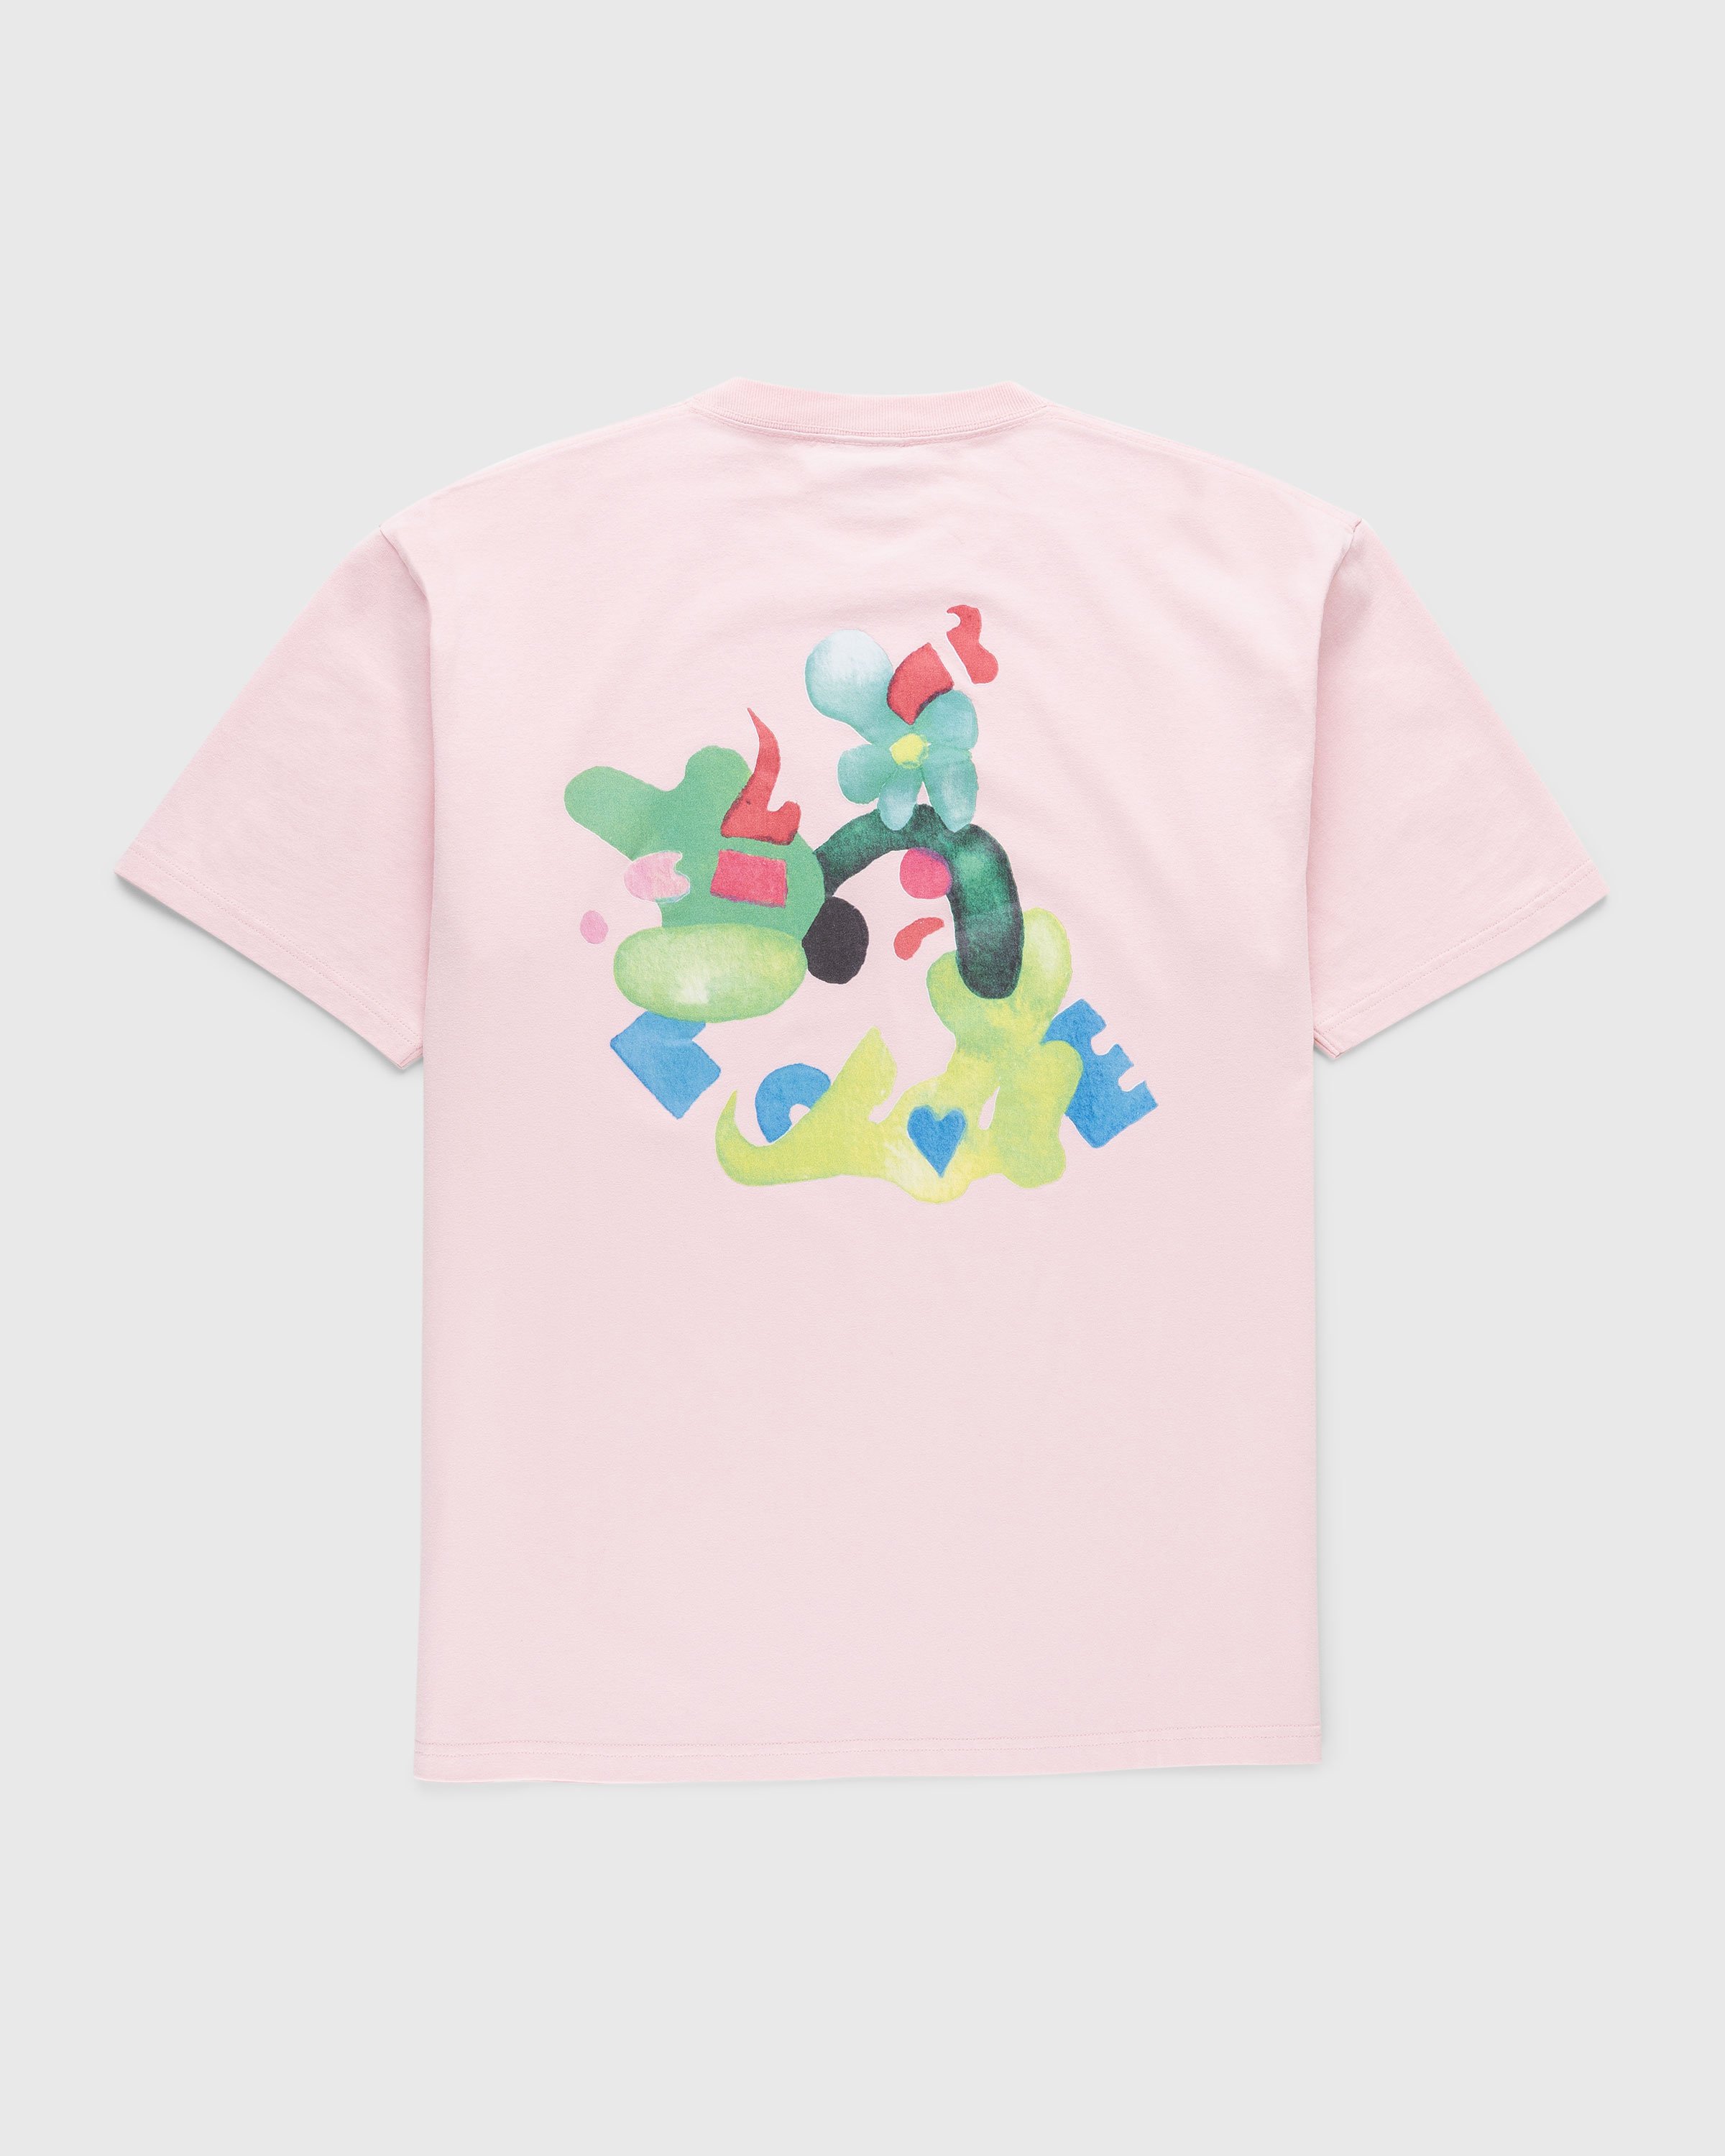 NTS x Highsnobiety - Graphic T-Shirt Pink - Clothing - Pink - Image 1